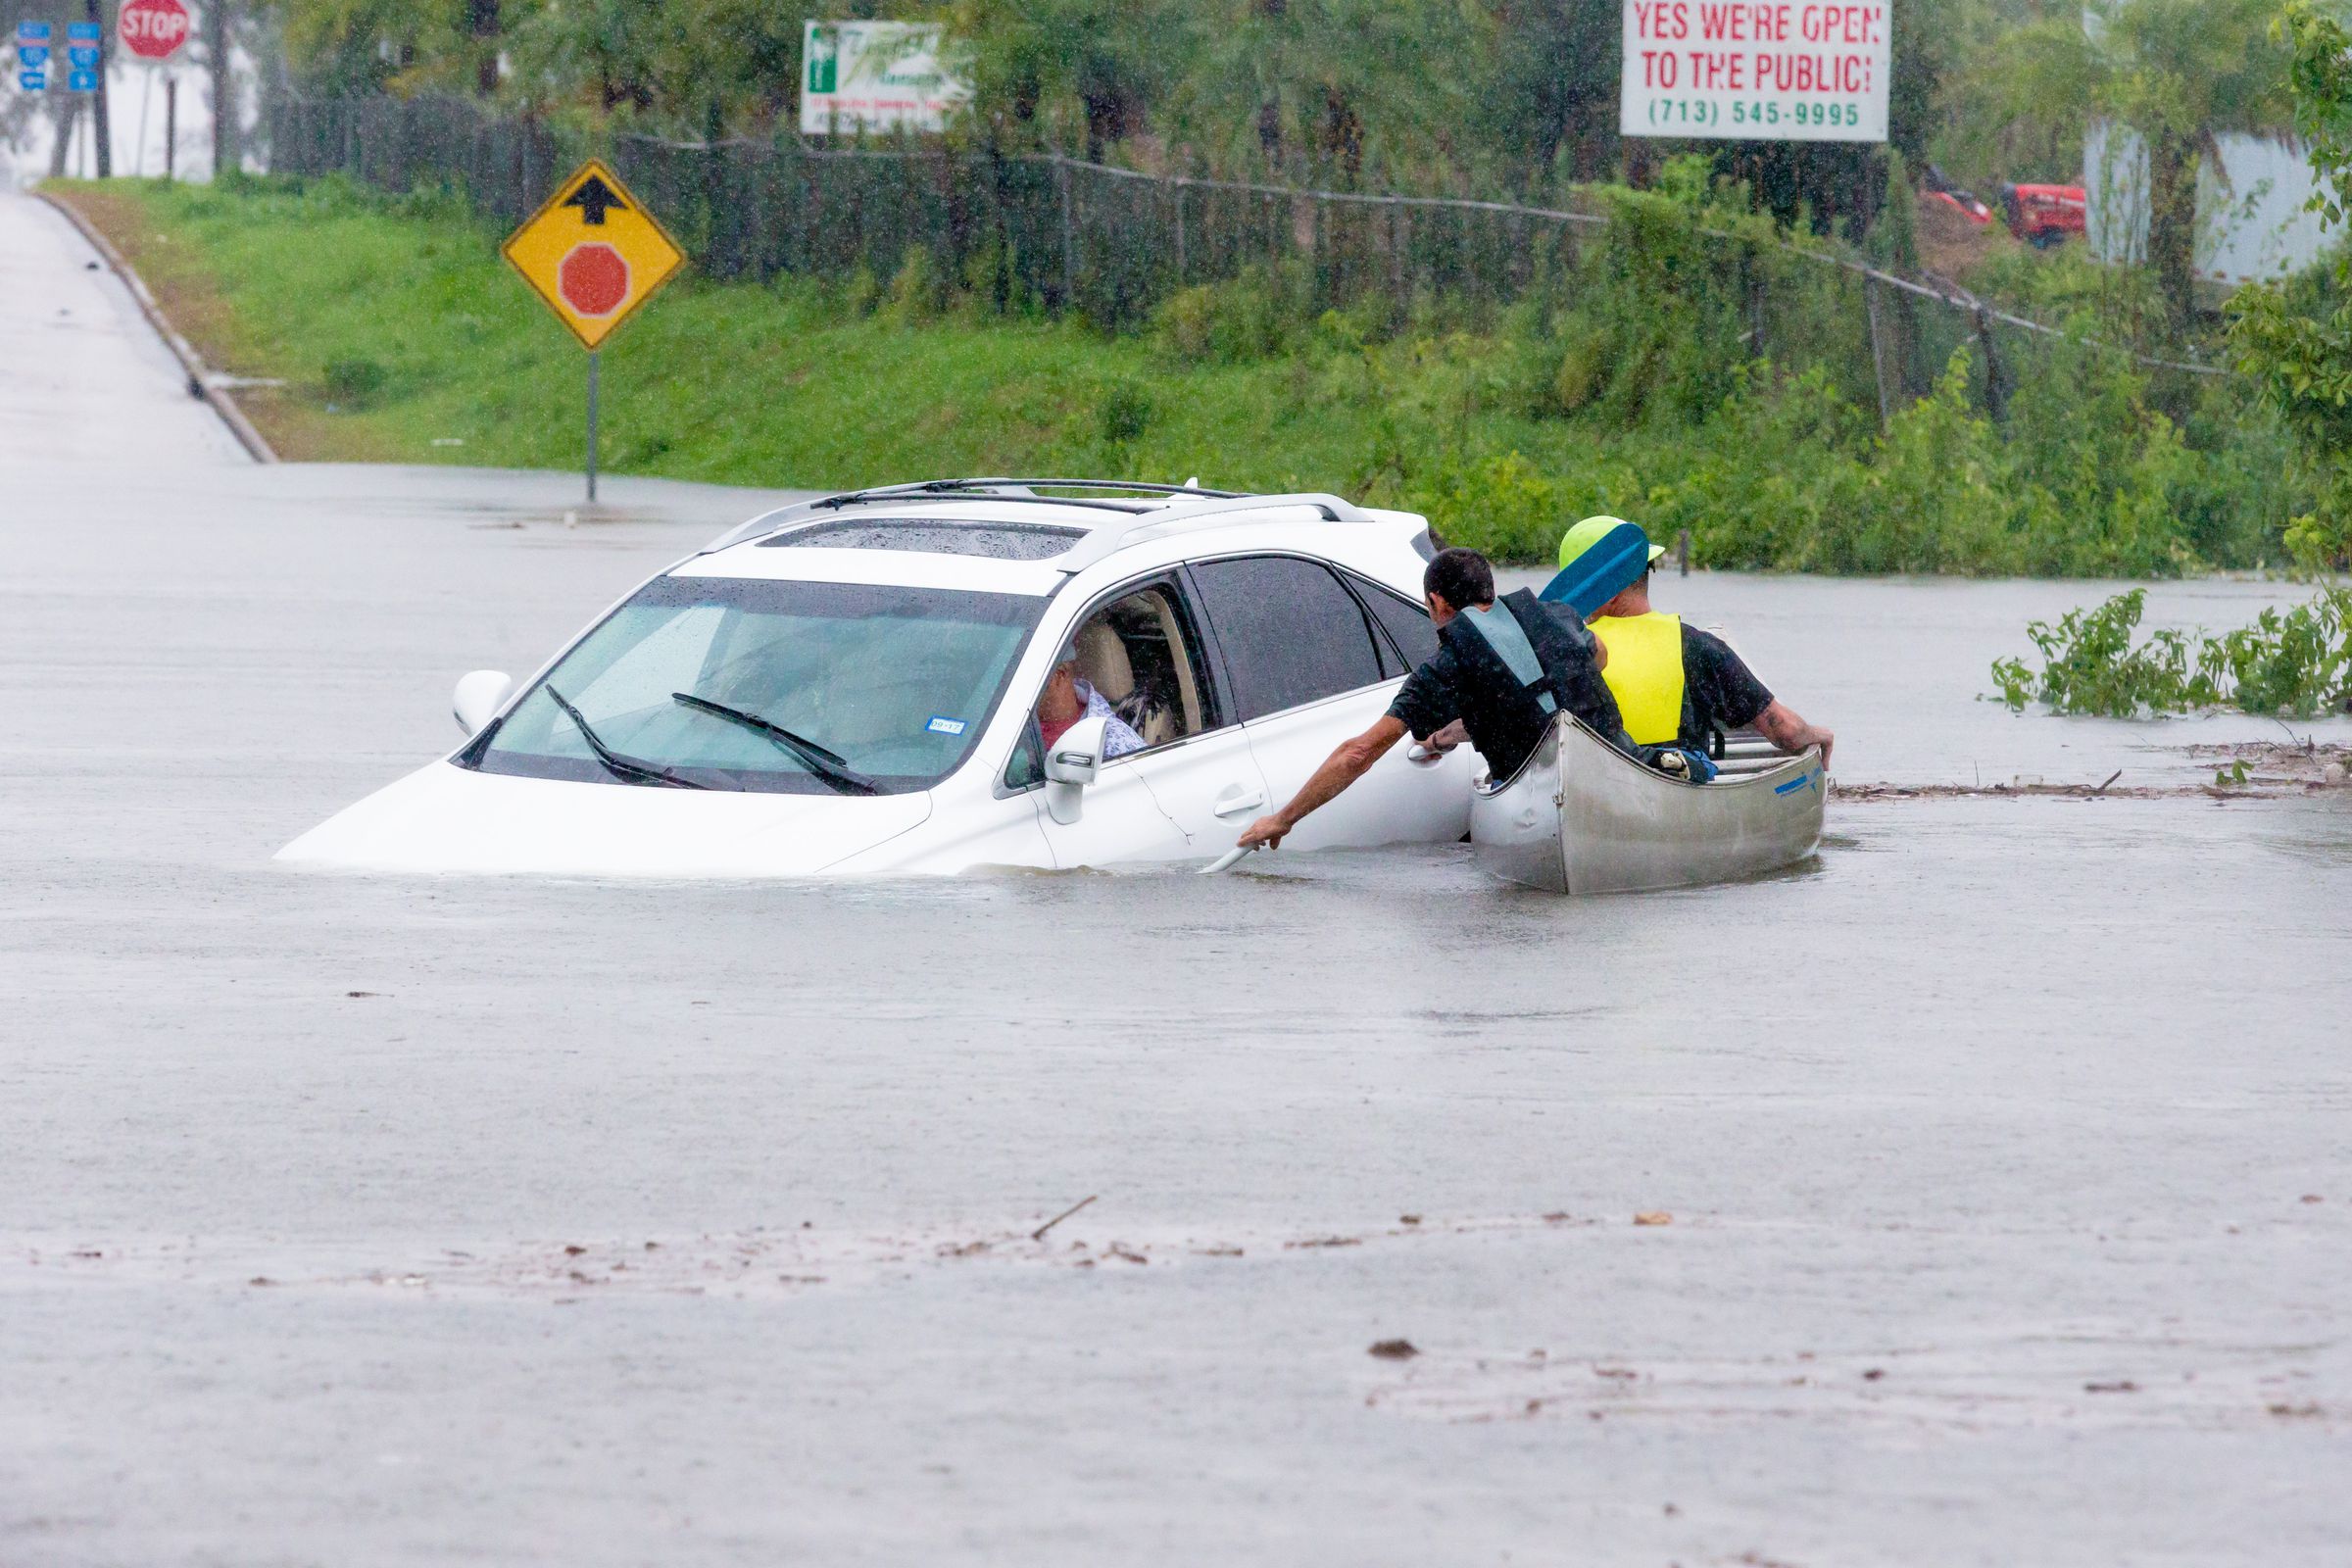 Volunteers in a canoe makes their way to assist a driver that was stalled going through high water during Hurricane Harvey, Monday, August 29, 2017.